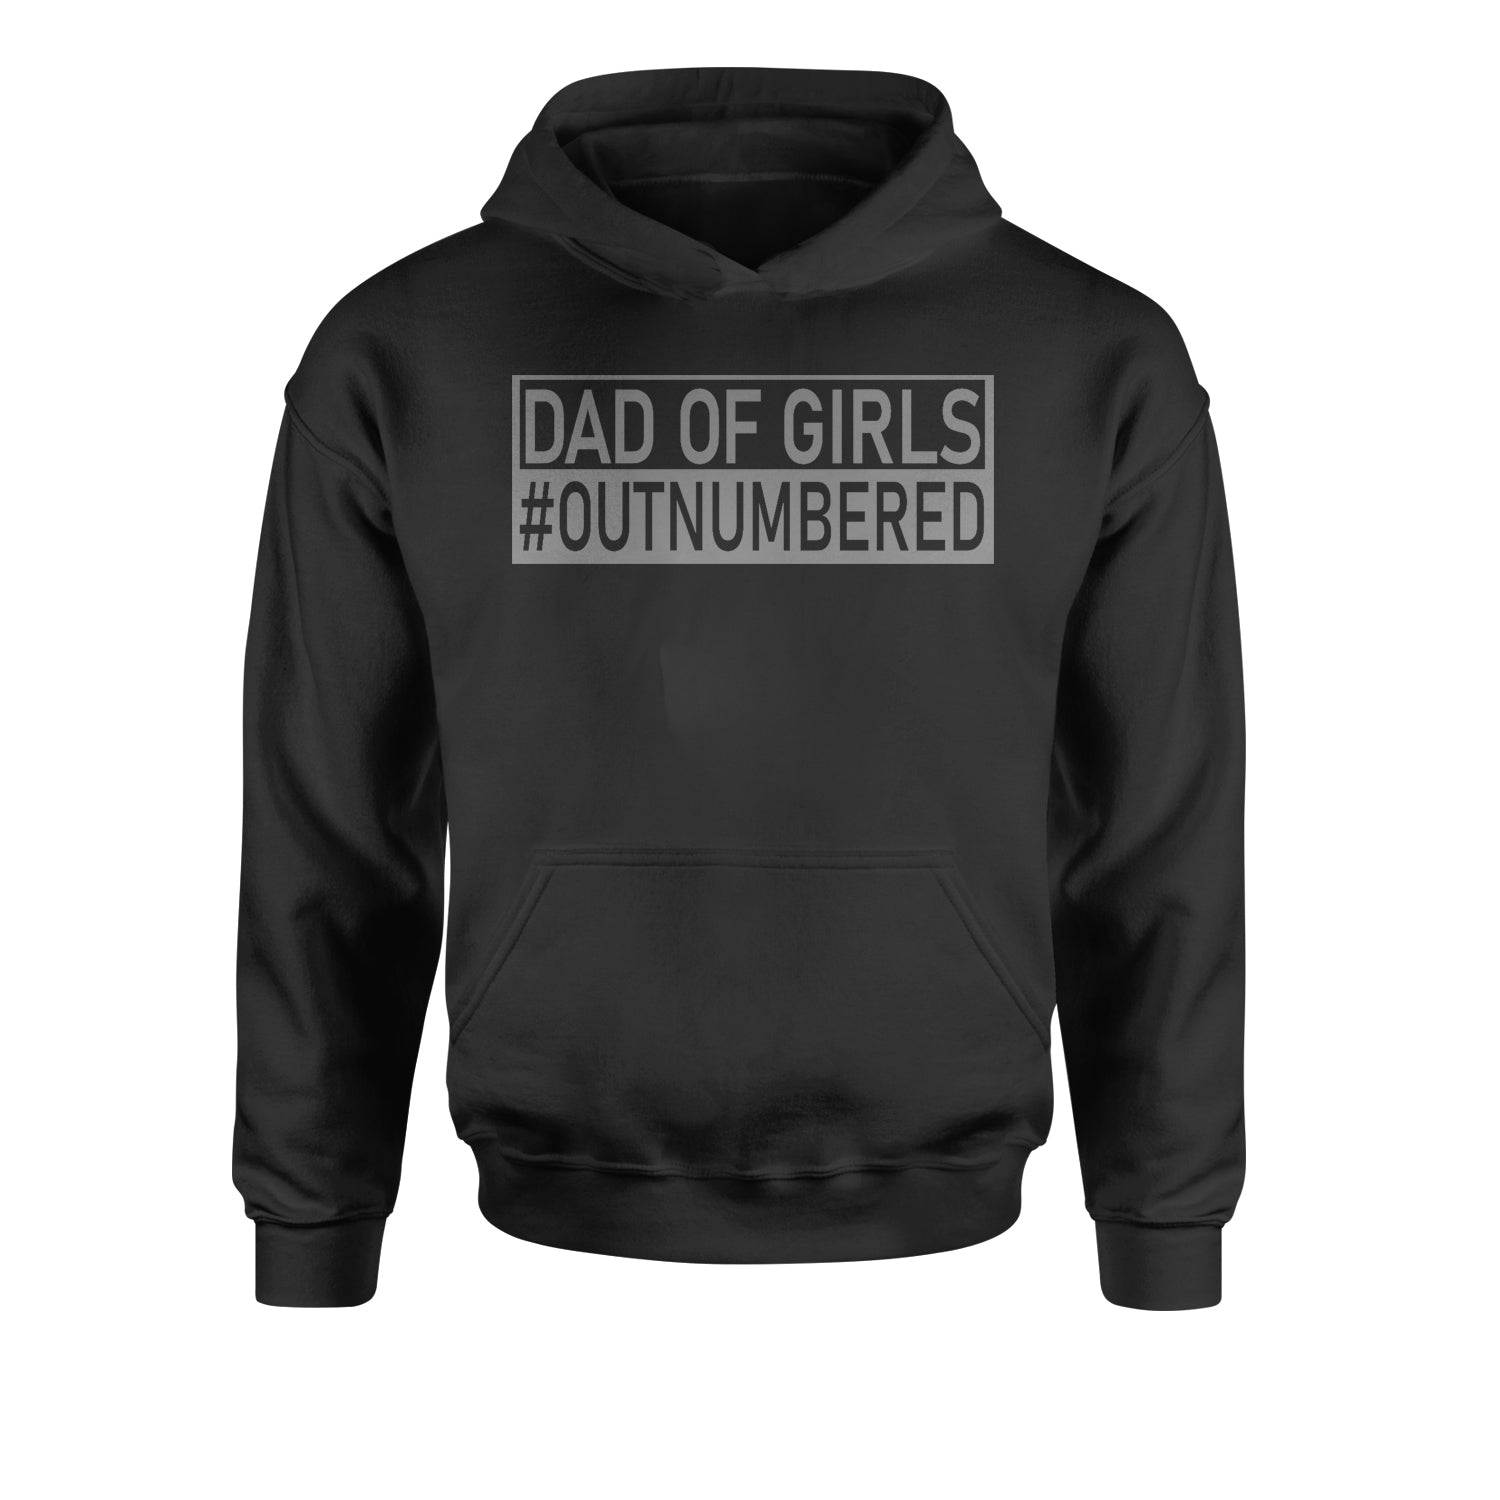 Dad of Girls Shirt for Fathers Day Gift Youth-Sized Hoodie dad, day, fathers, papa, pop by Expression Tees